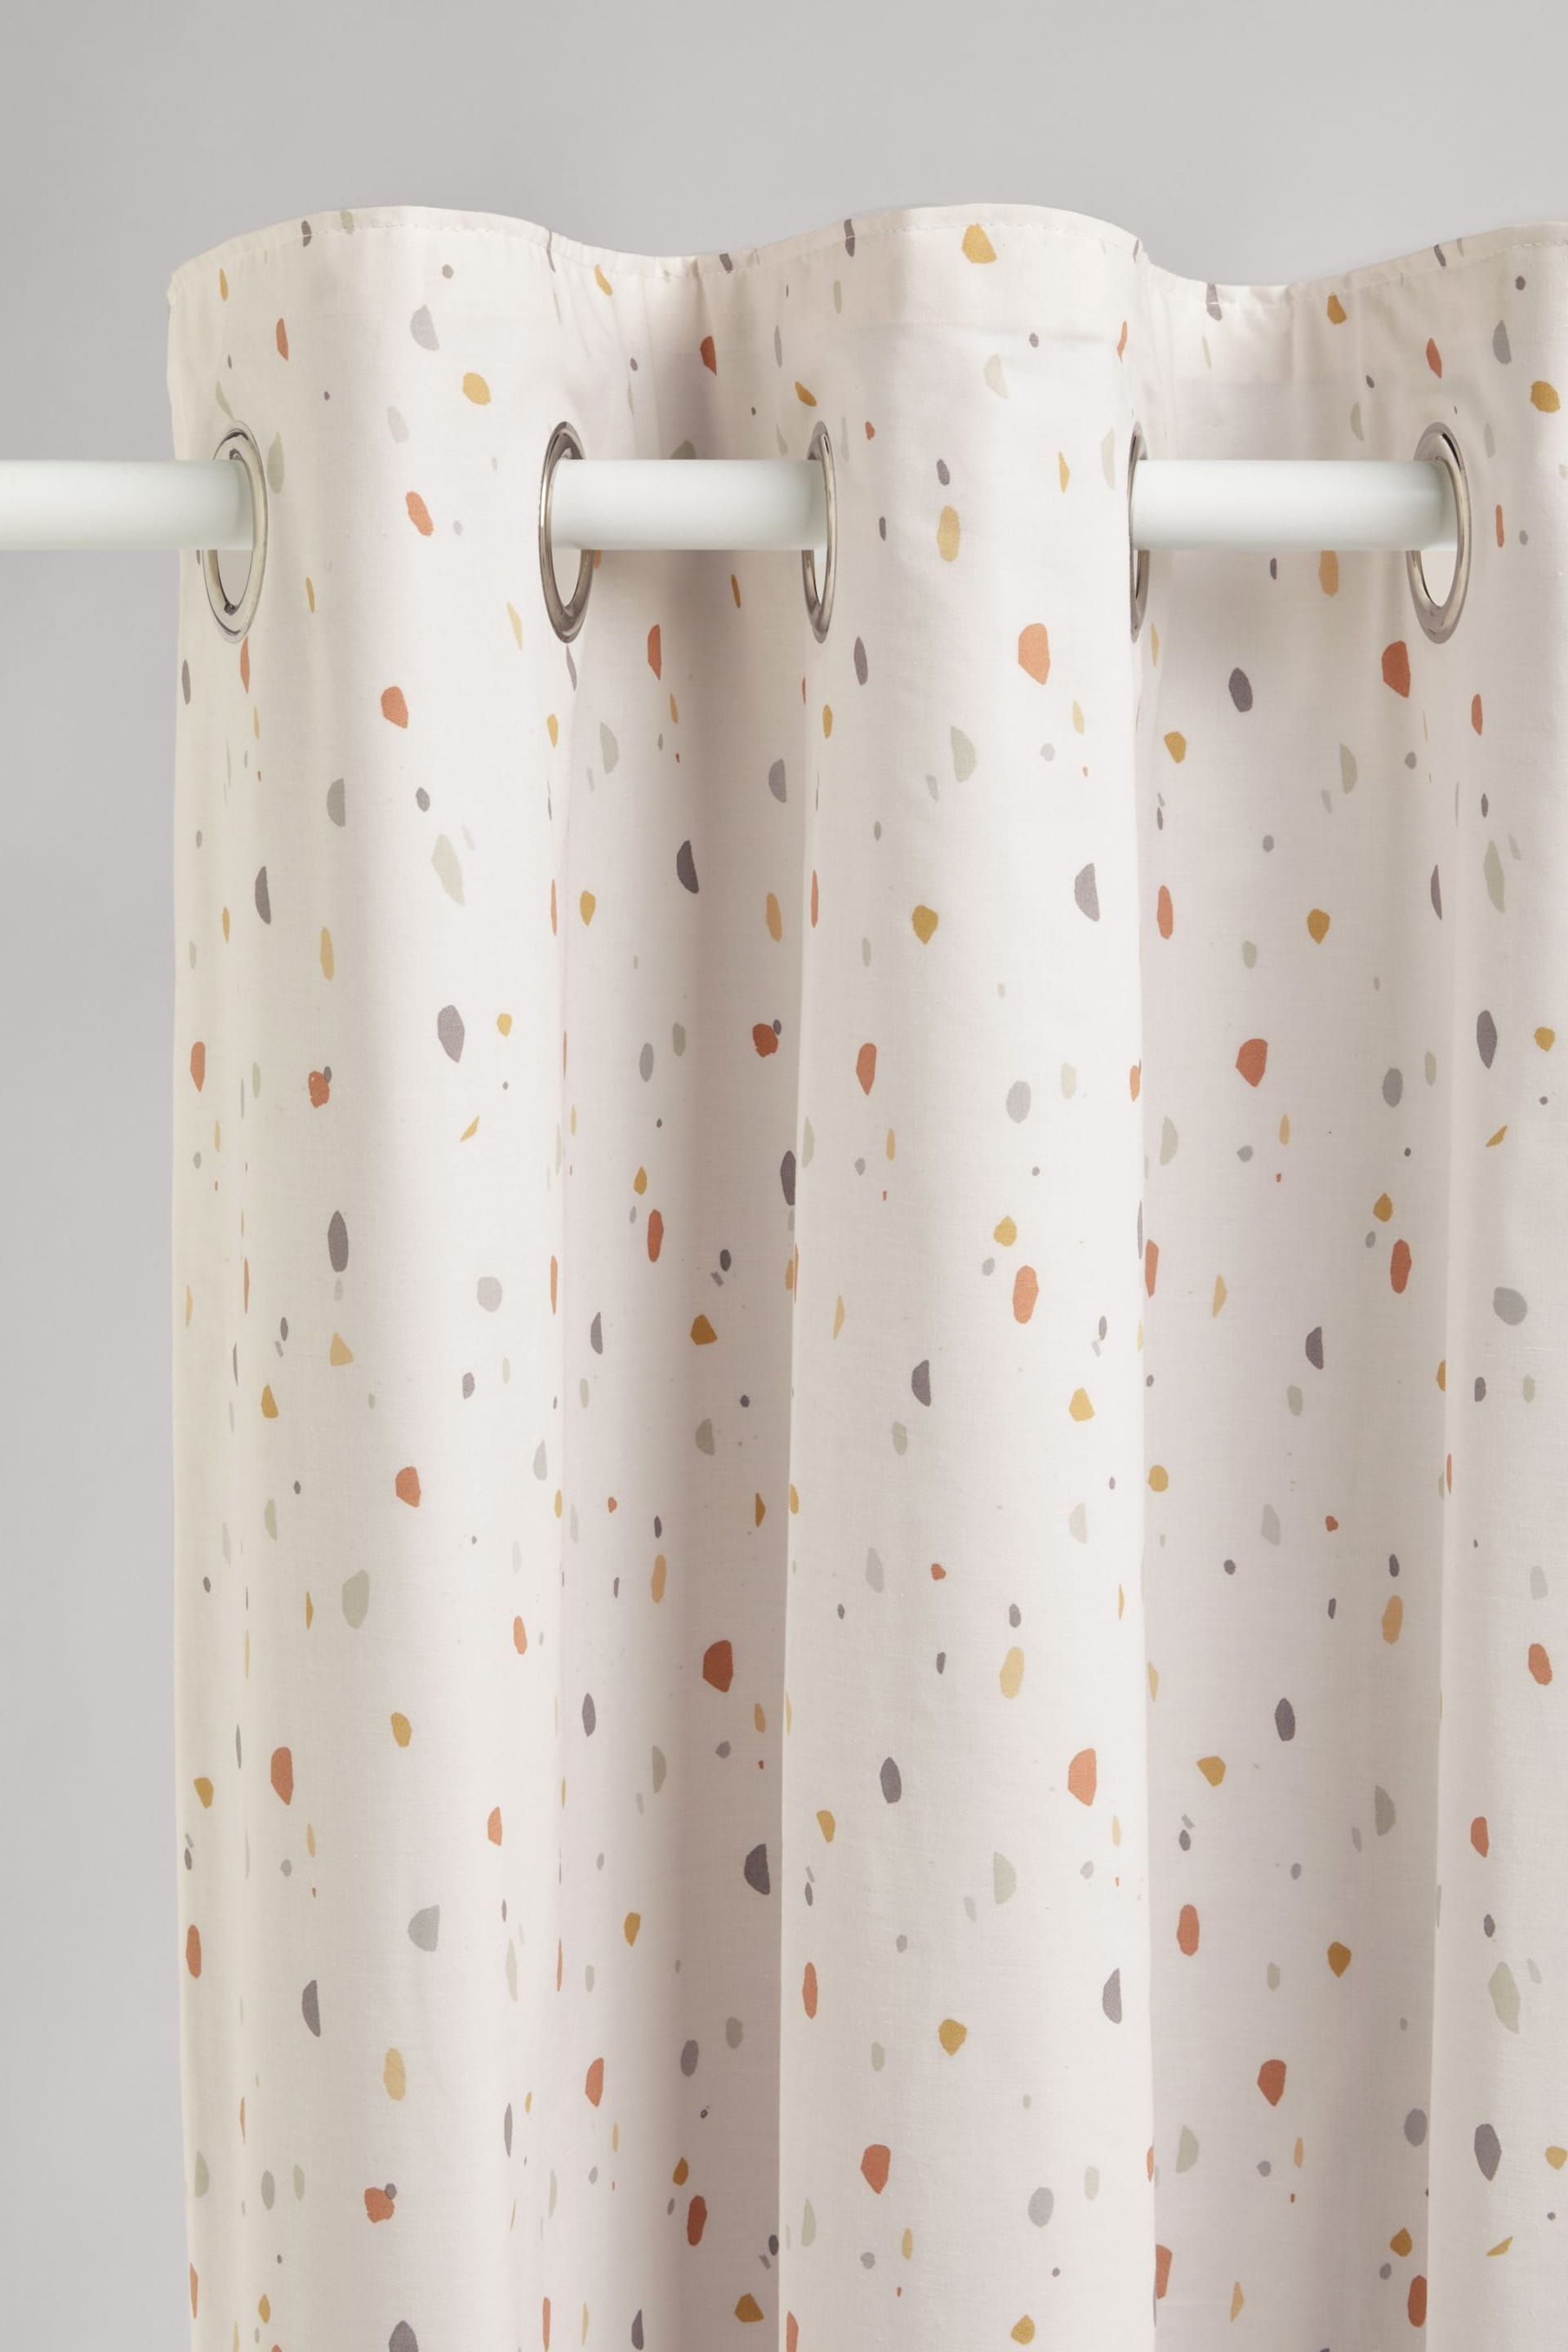 Natural Terrazzo Eyelet Blackout Curtains - Image 1 of 8